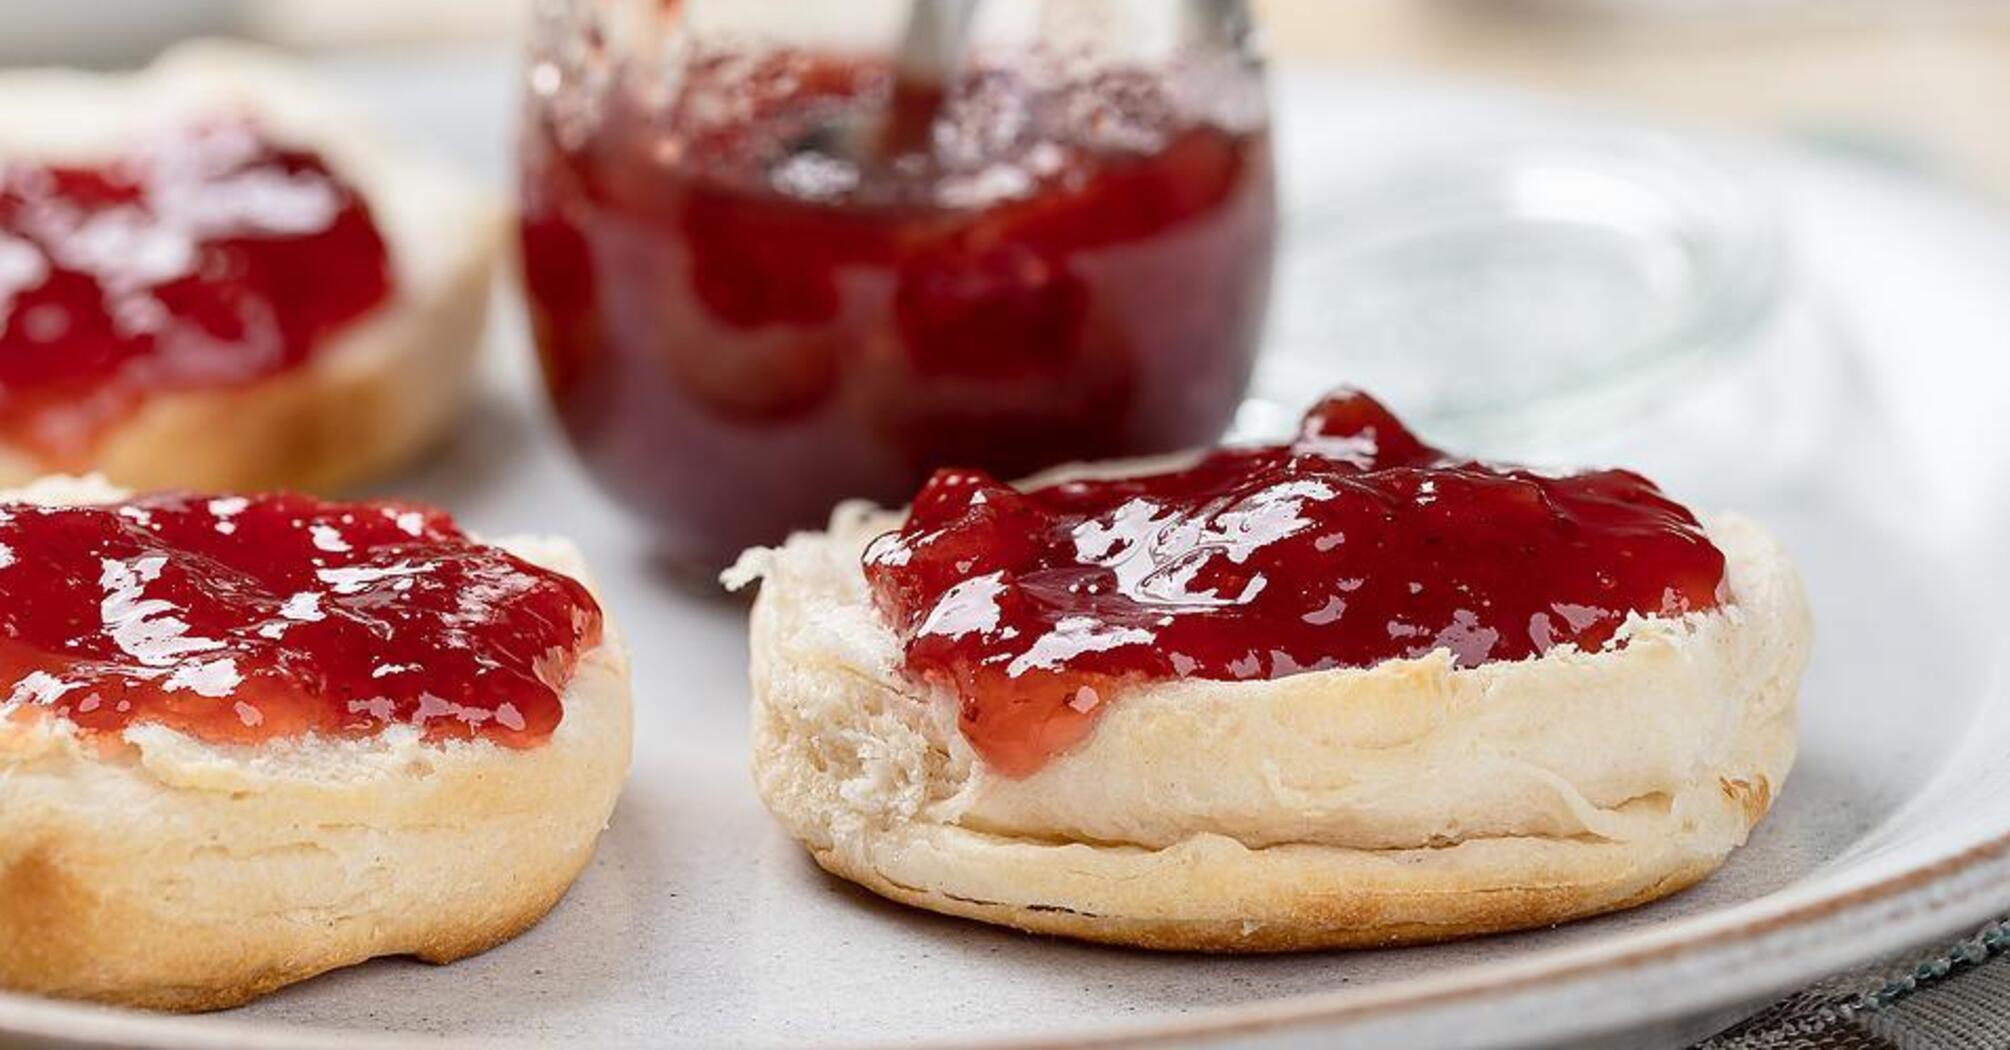 How to make sugar-free jam for winter: any berries and fruits will do